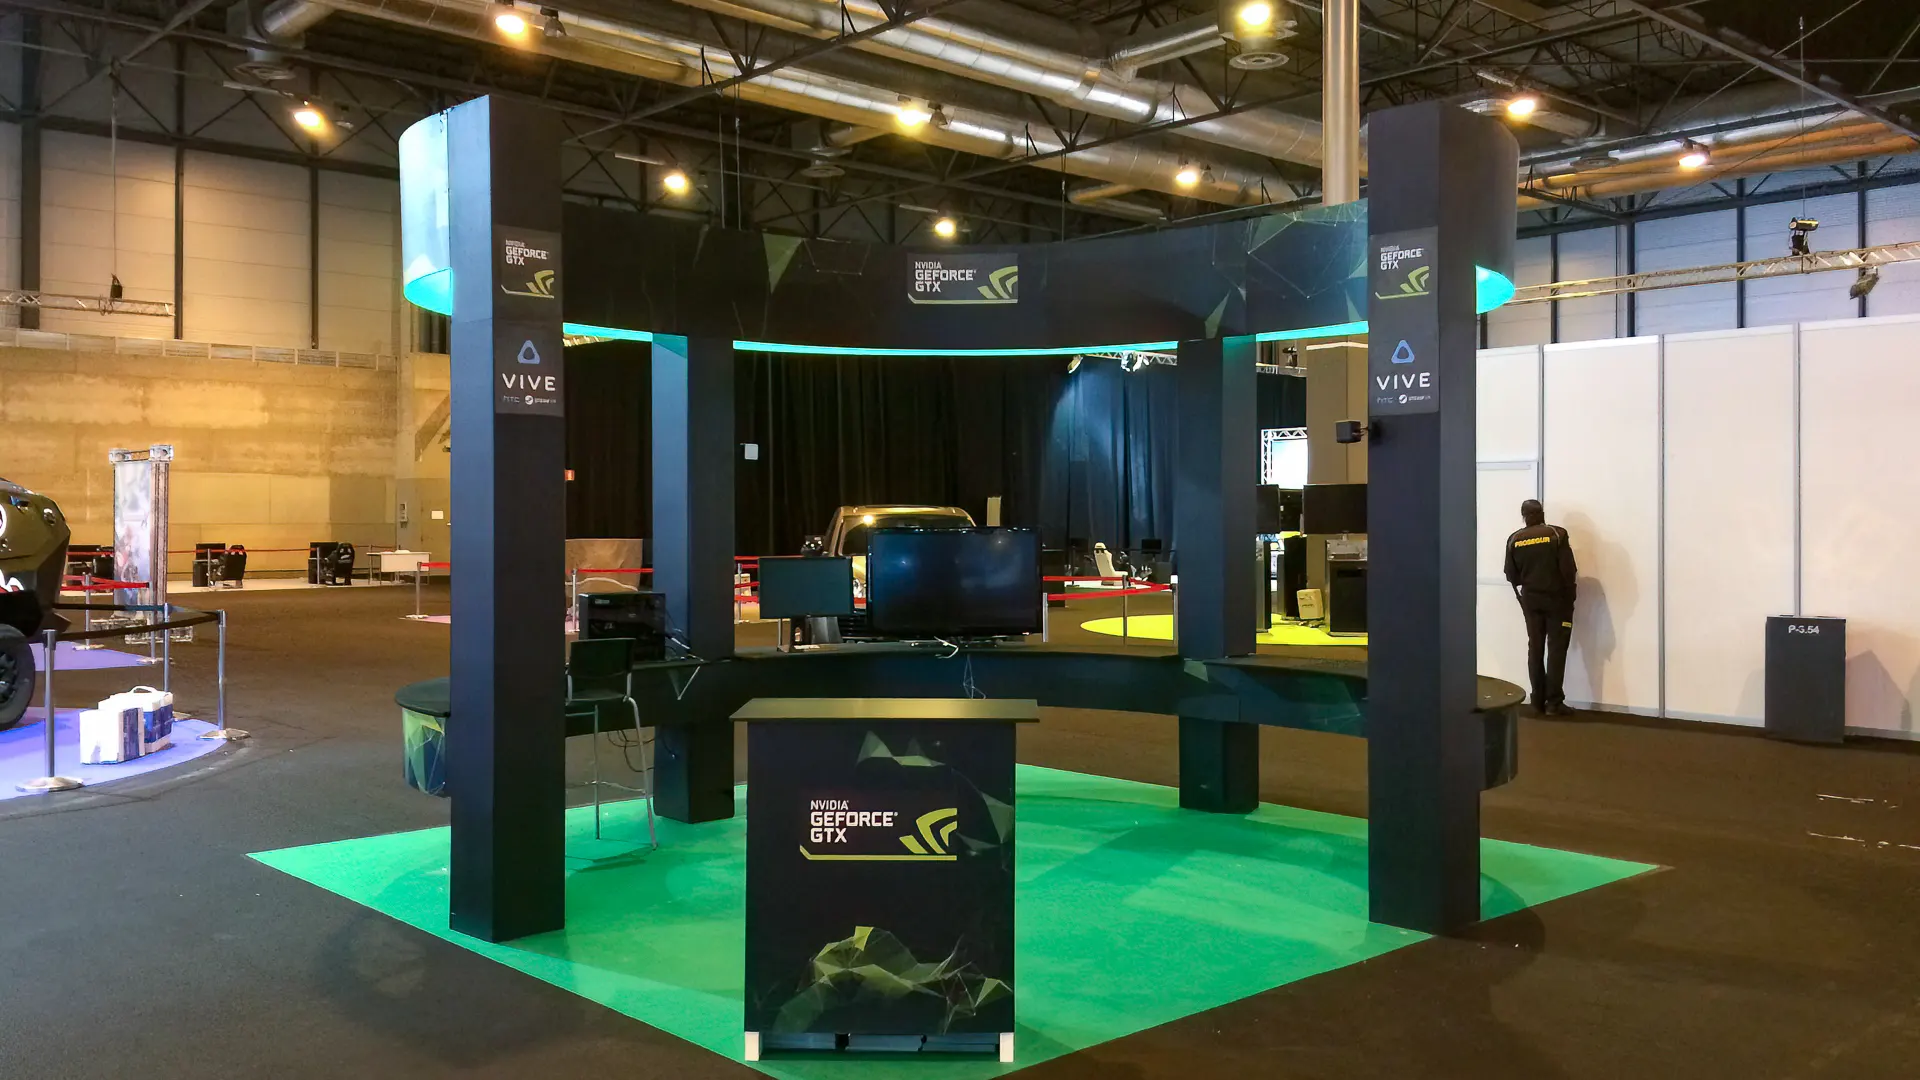 Stand de NVIDIA en Madrid Auto by Future Works